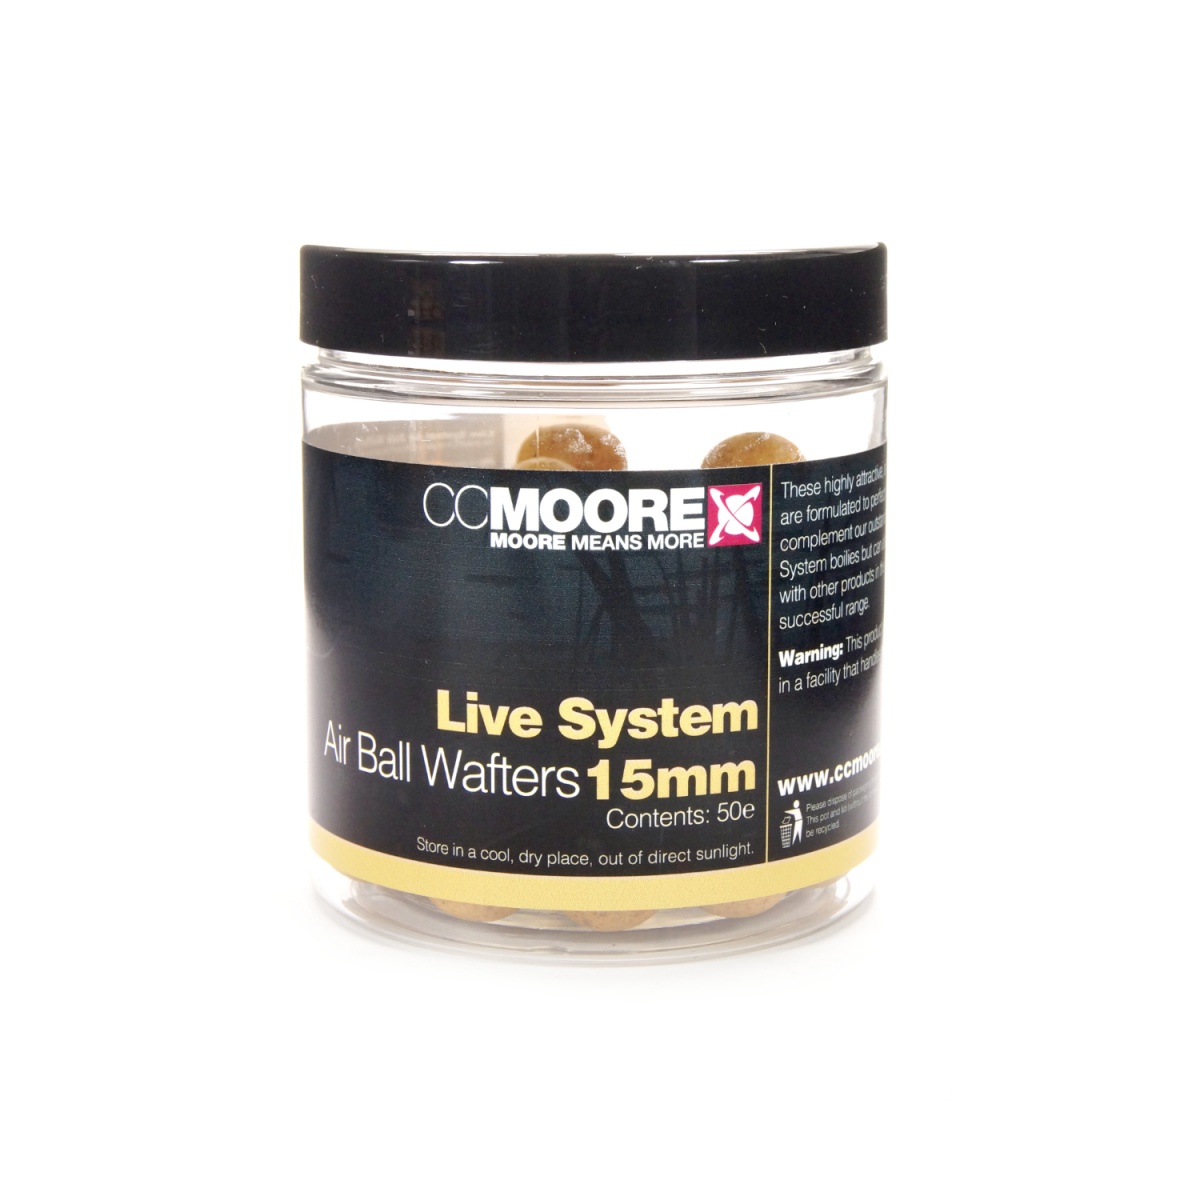 NEW CcMoore Live System Air Ball Wafters 15 mm rozmiar